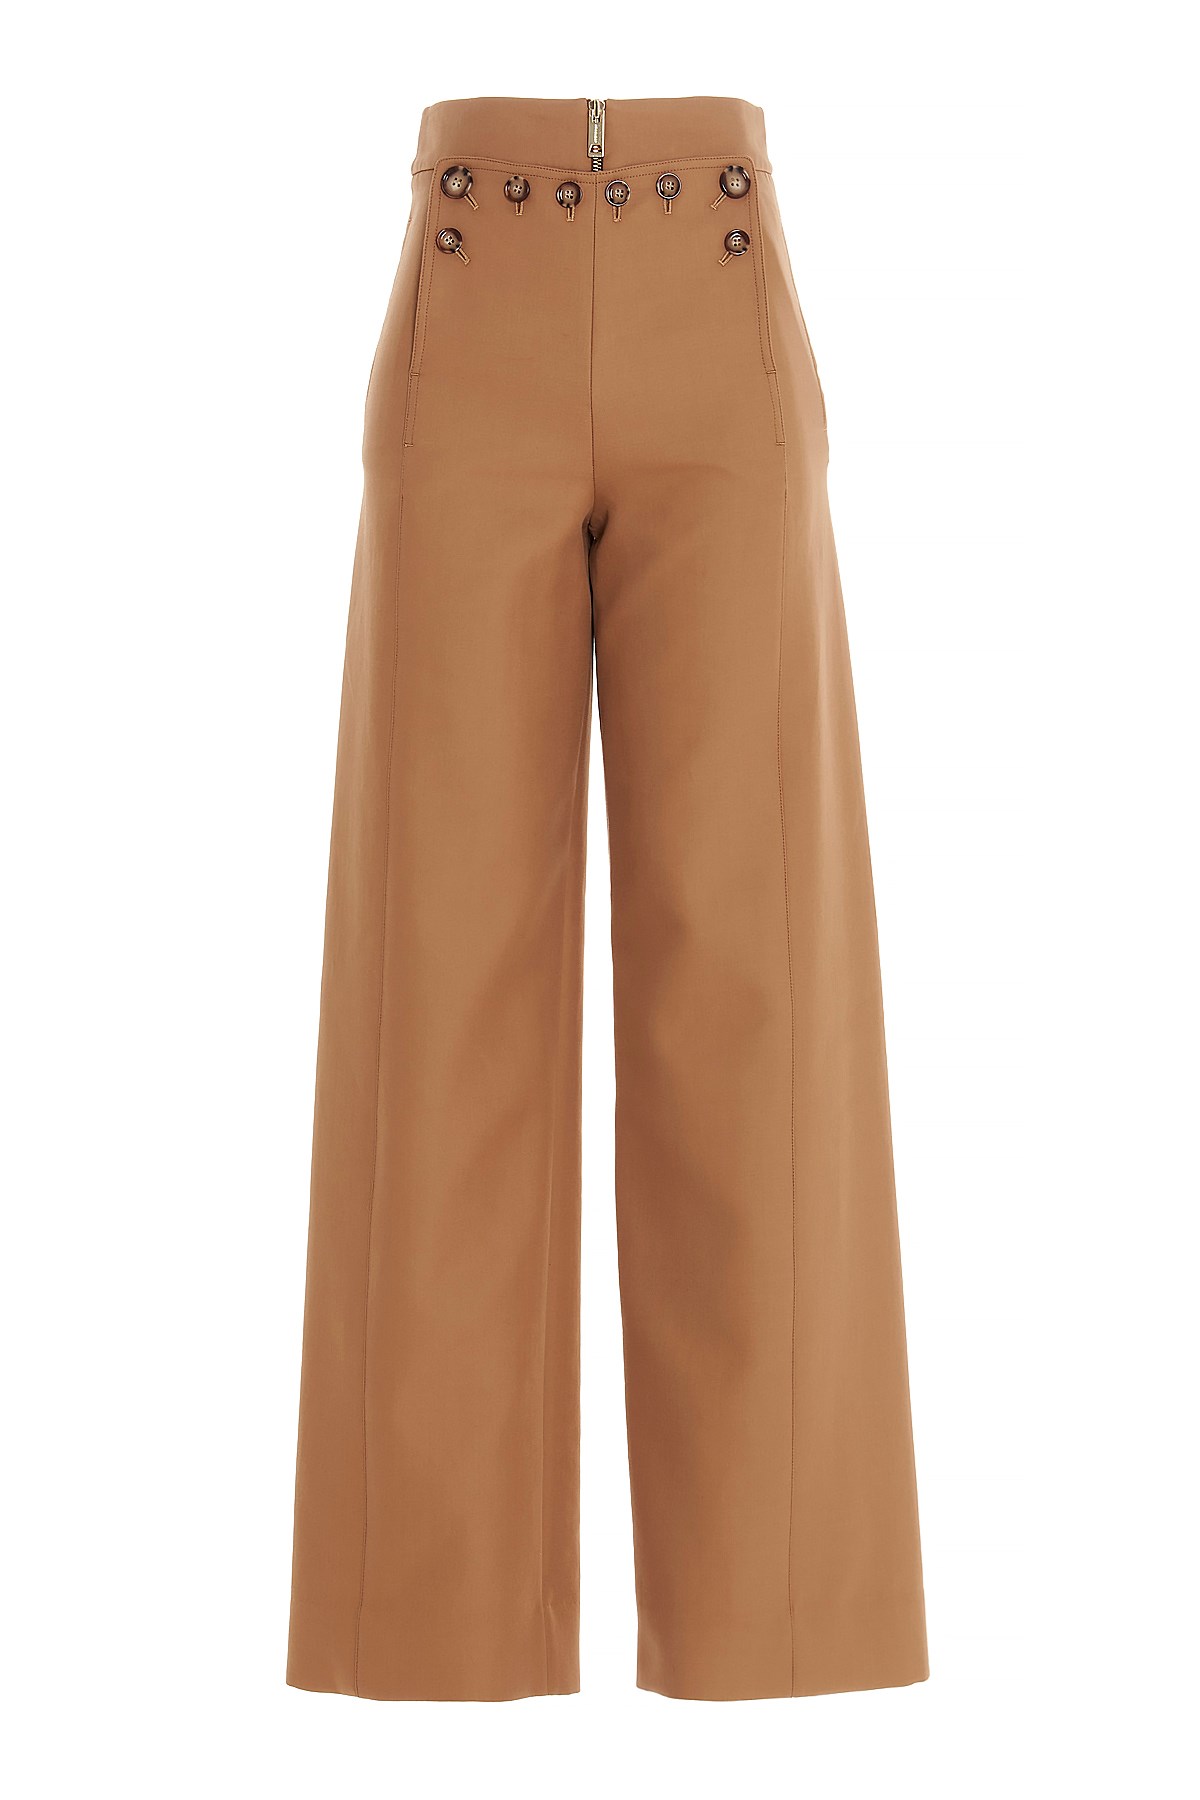 BURBERRY 'Sailor’ Trousers